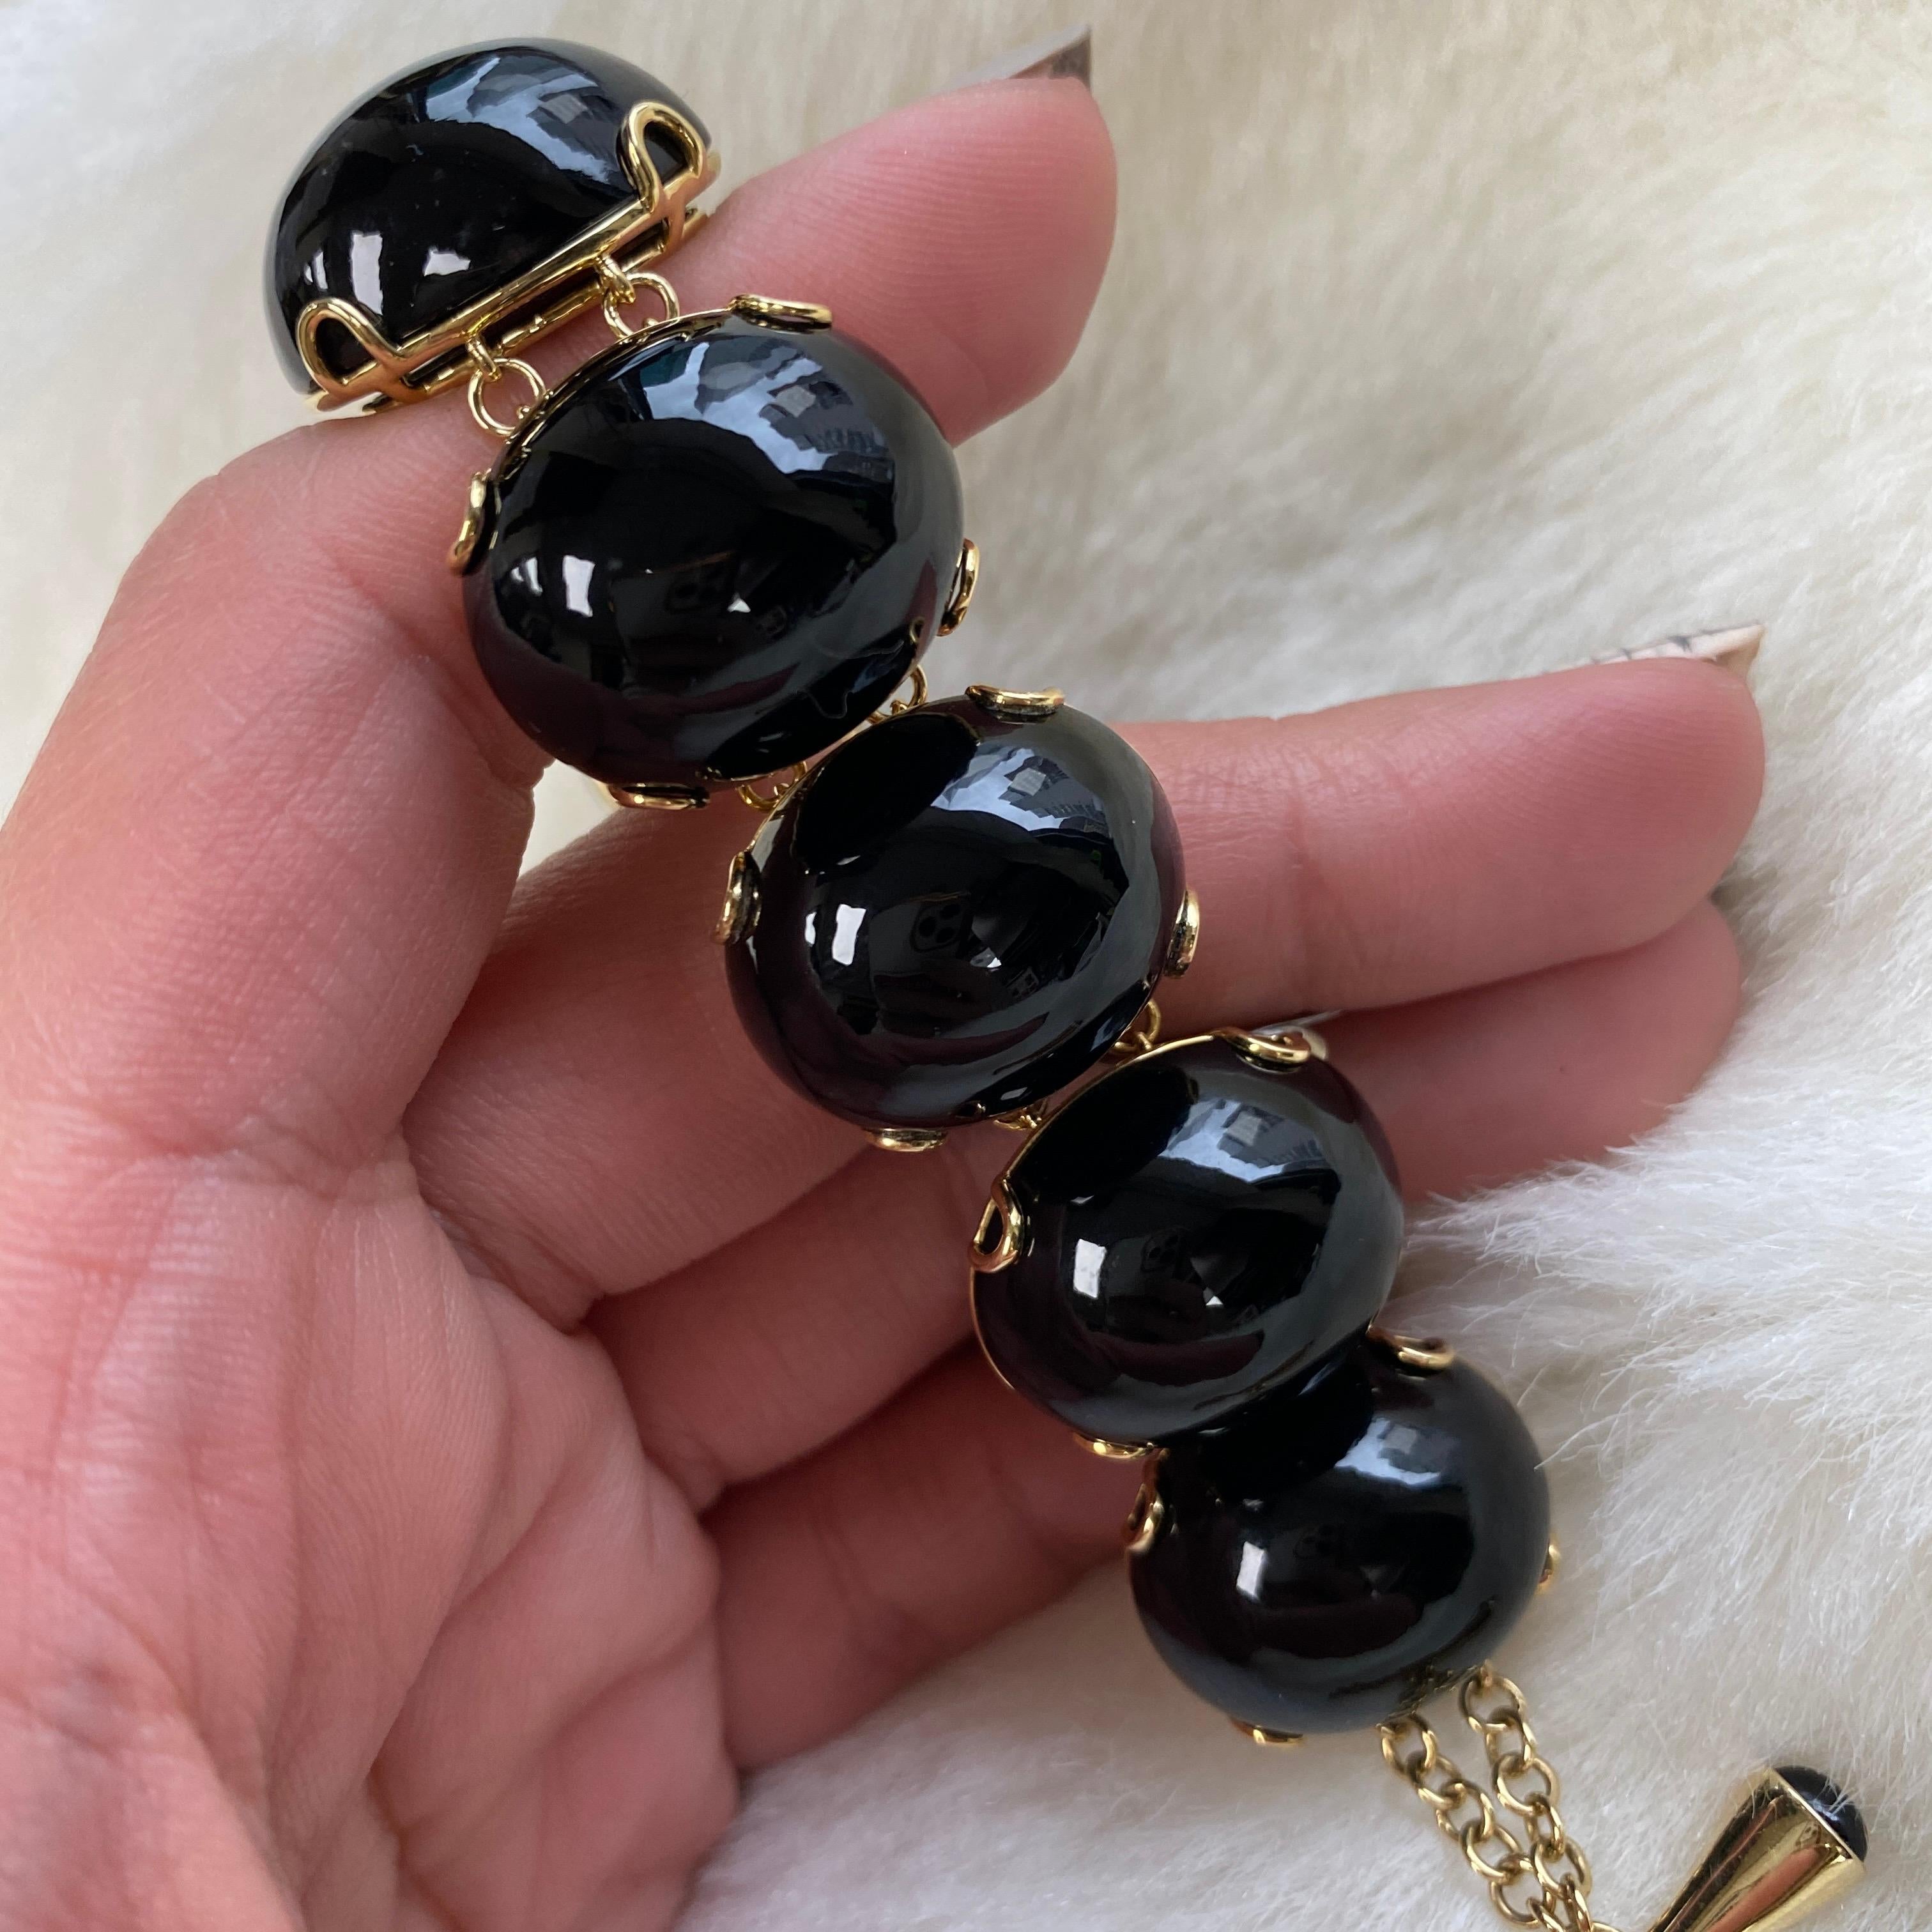 This Onyx Oval Cabochon Bracelet in 18K Yellow Gold is a captivating piece of jewelry that is part of the exclusive 'Rock 'N Roll' Collection. Crafted with meticulous attention to detail, this bracelet features mesmerizing oval-shaped Onyx cabochon